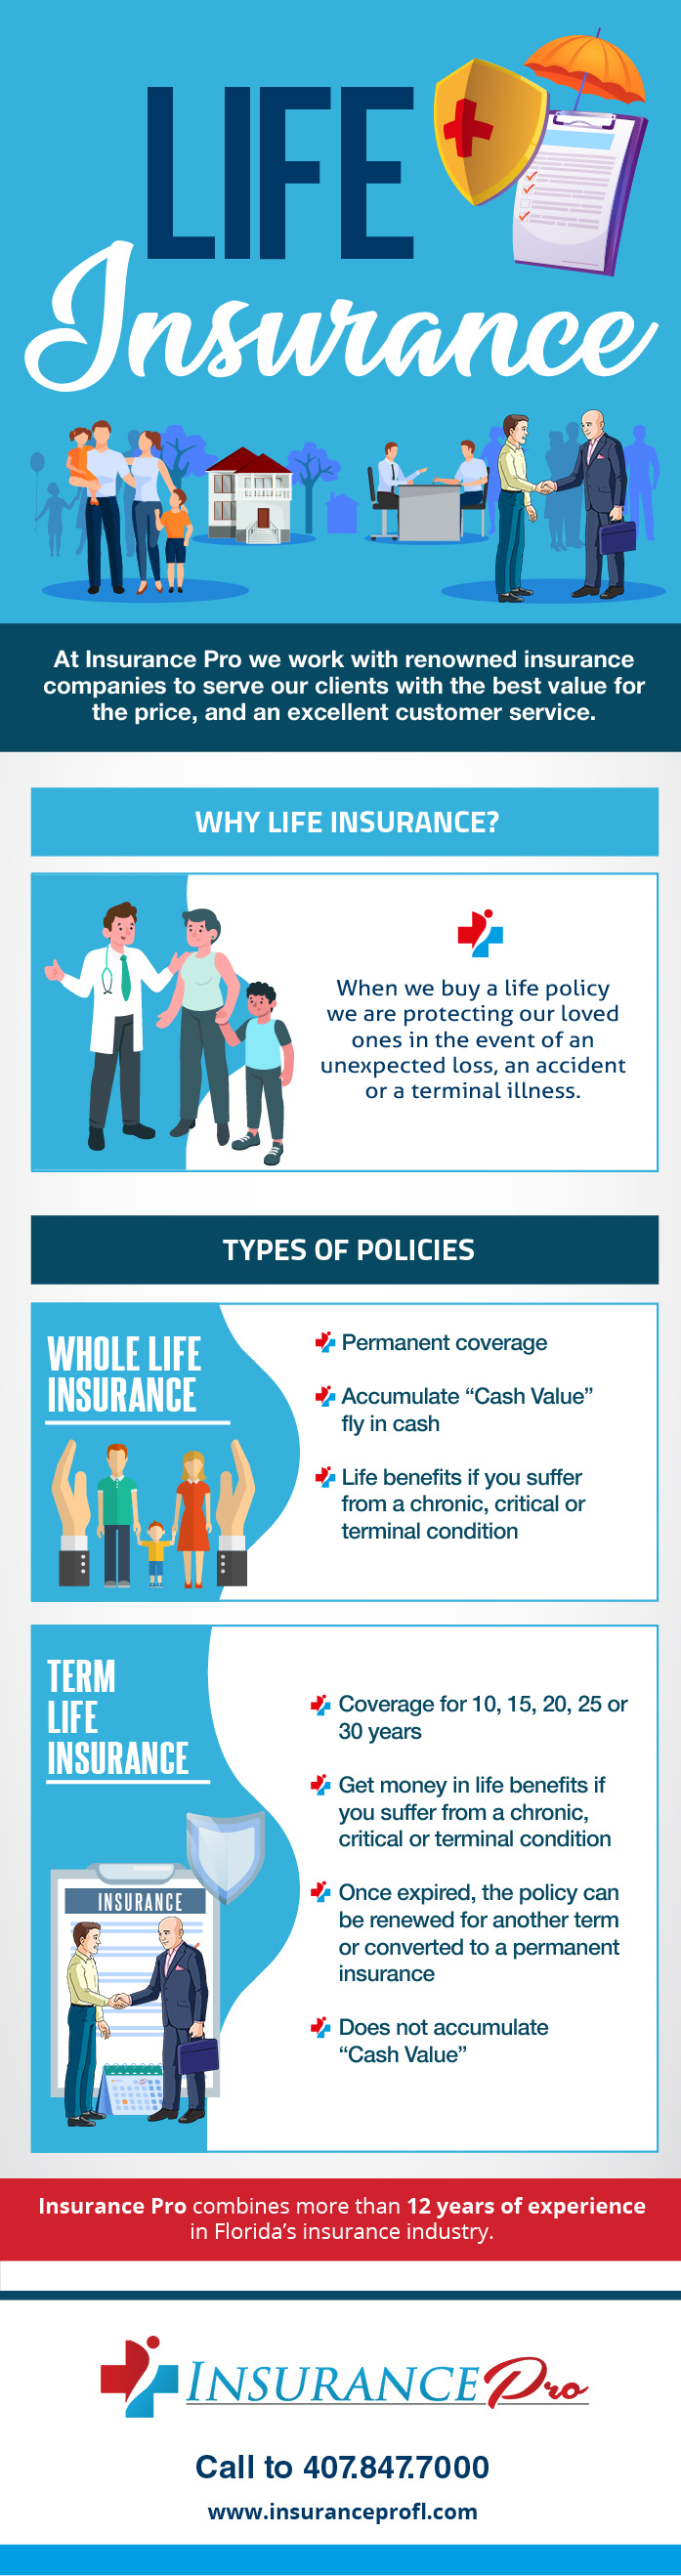 Life insurance infographic